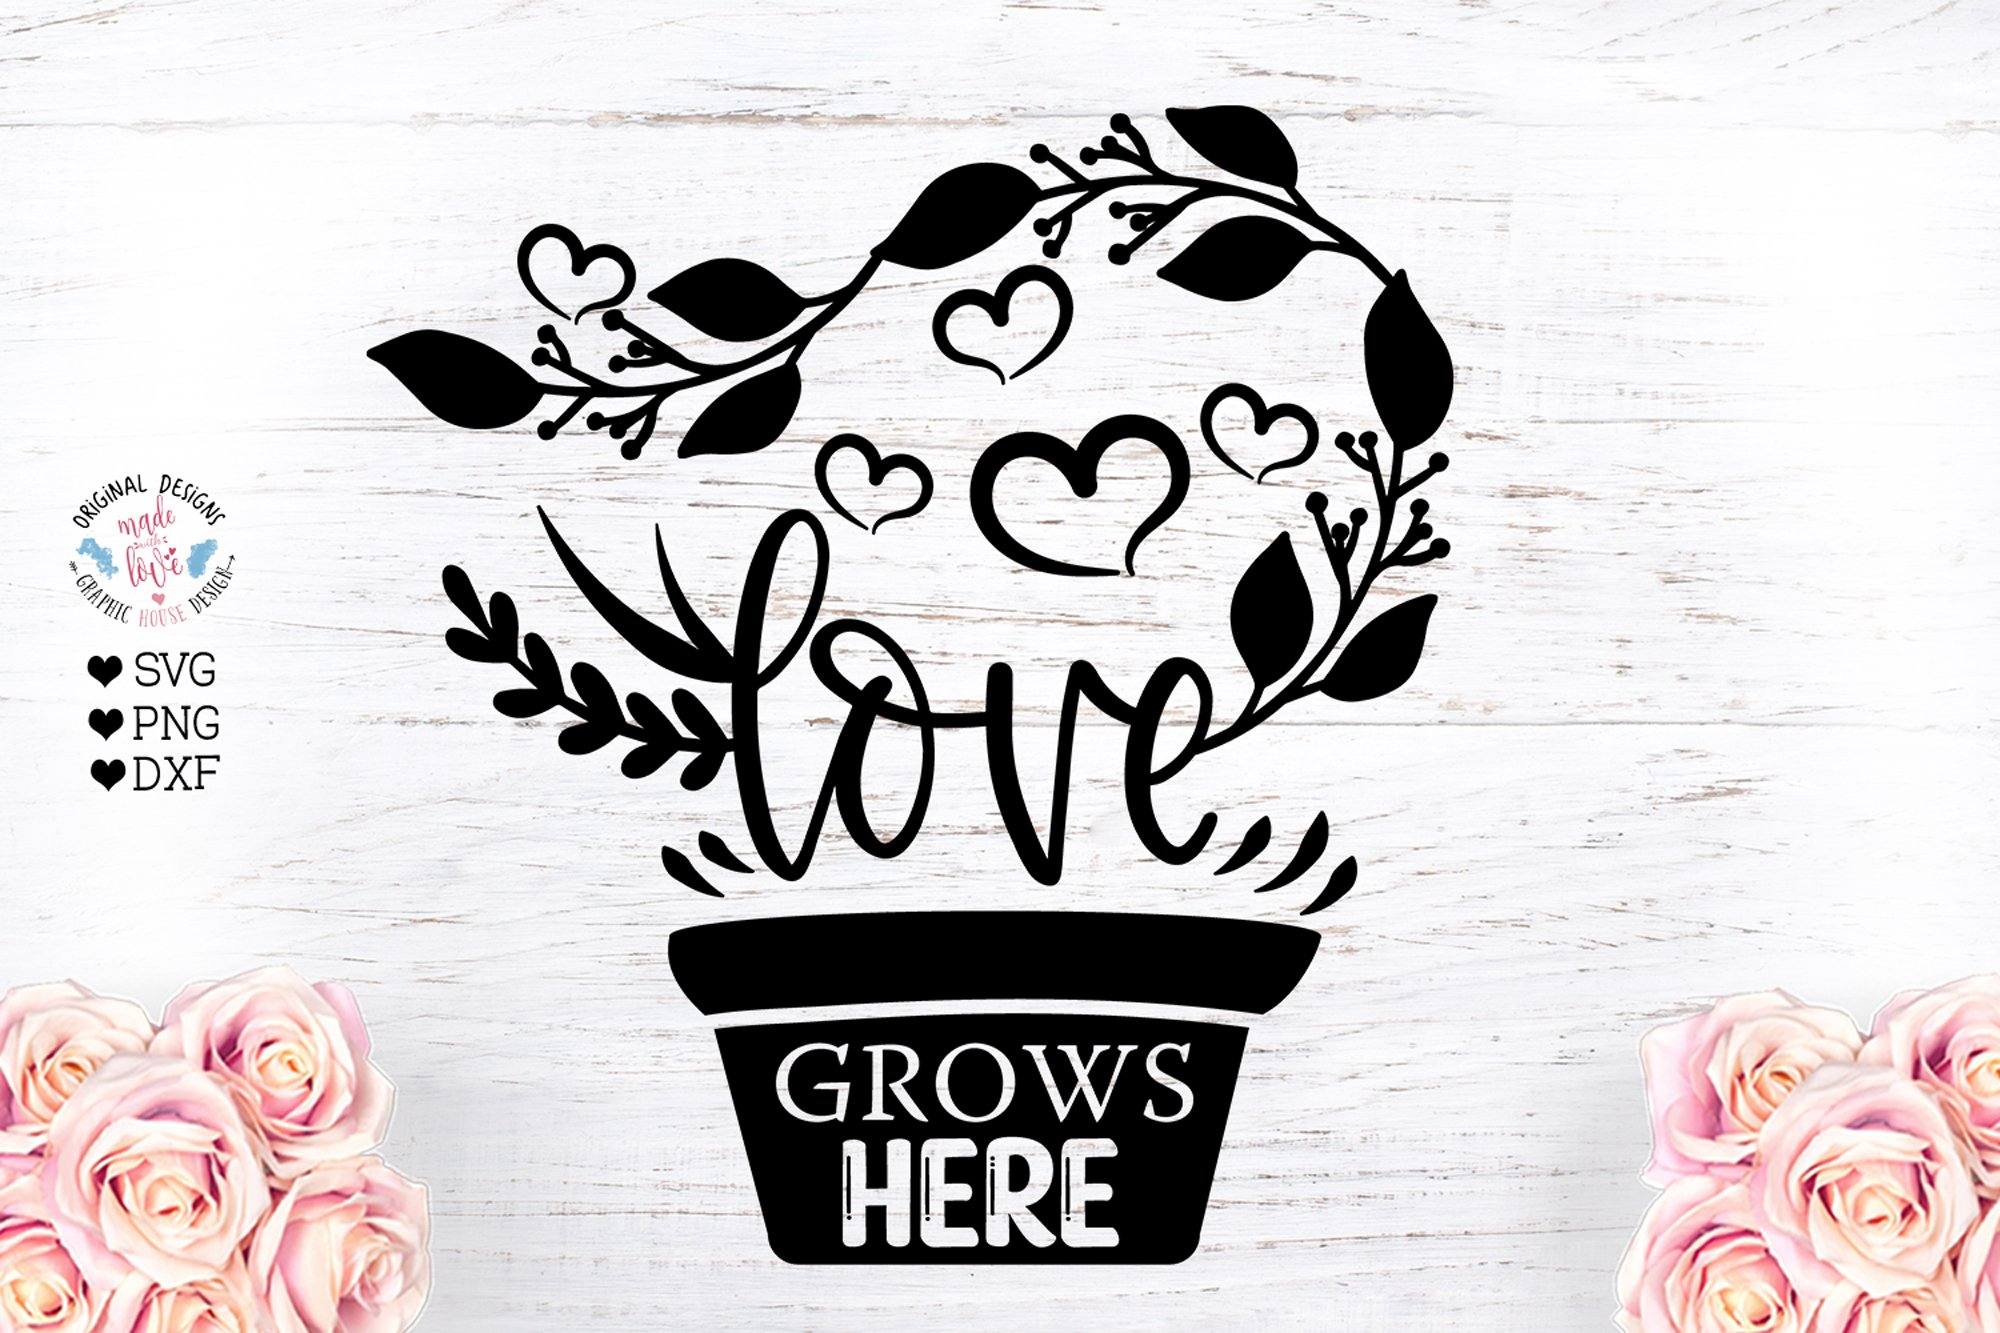 Download Cricut Cutting File Springtime Printable Spring Cut File Hand Lettered Silhouette Love Grows Here Svg Love Svg Cut File Wedding Svg Craft Supplies Tools Collage Sheets Delage Com Br